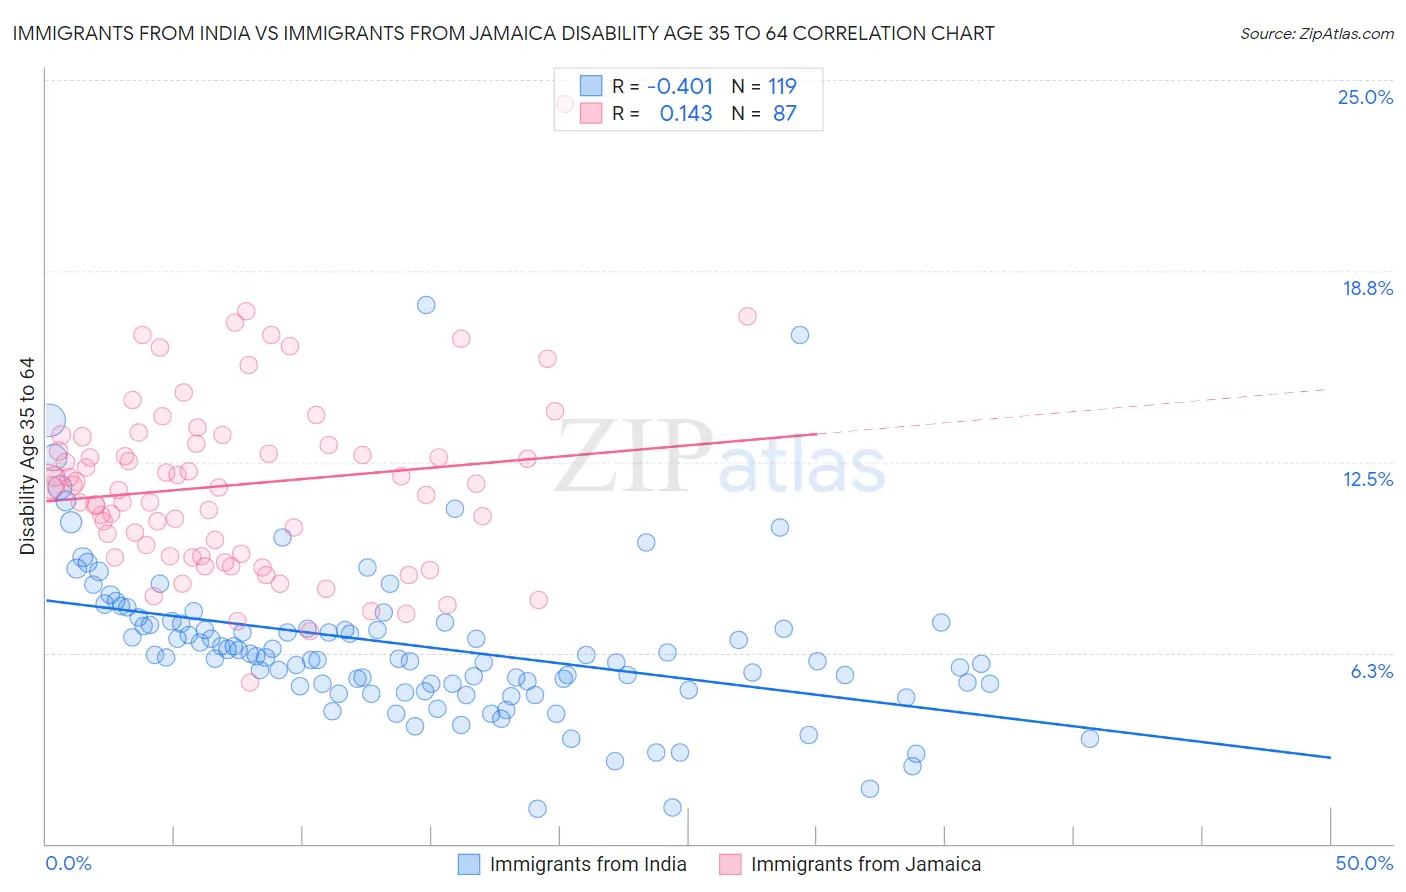 Immigrants from India vs Immigrants from Jamaica Disability Age 35 to 64